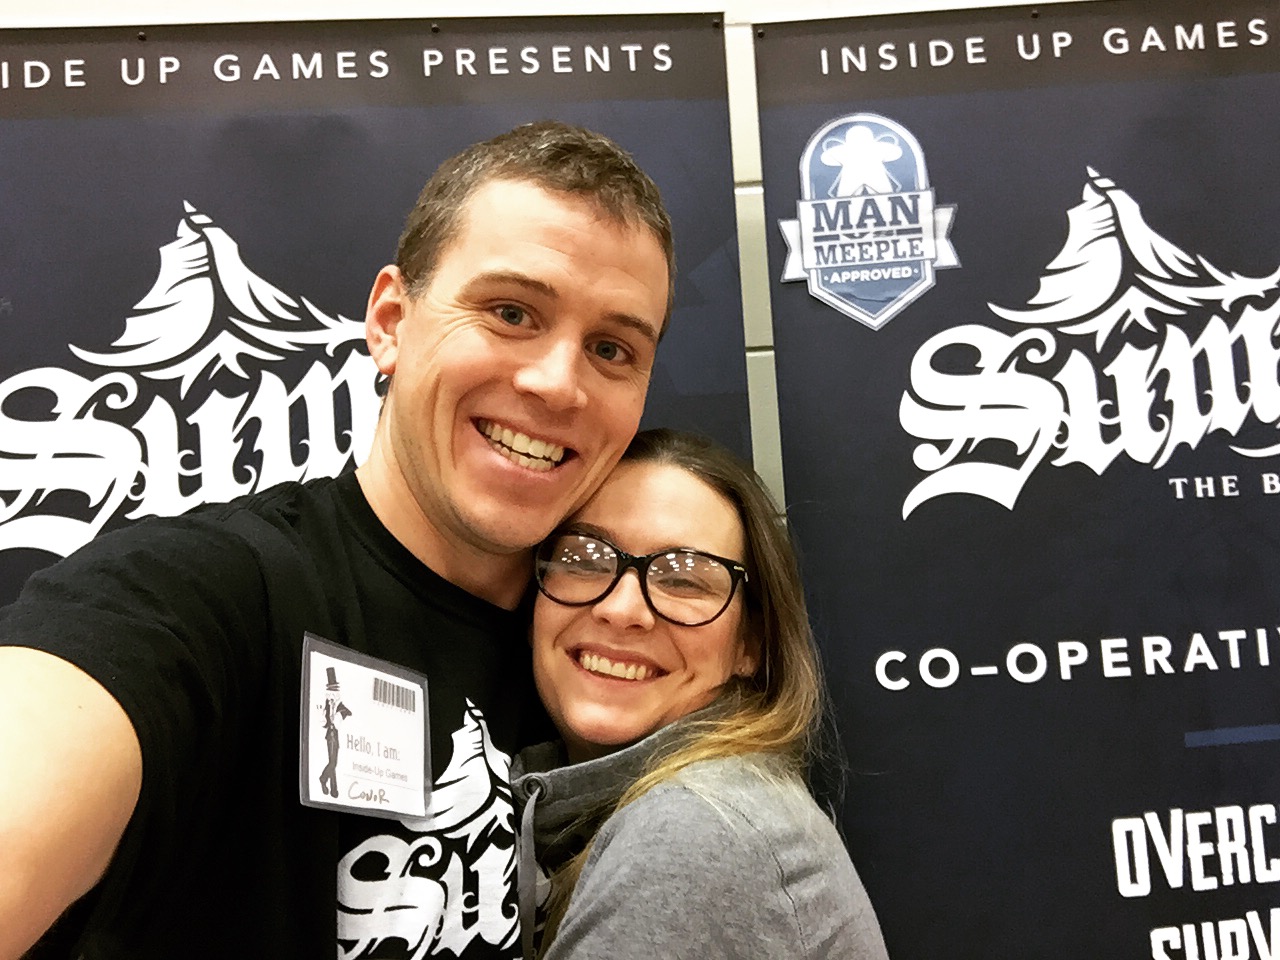 Conor McGoey hugging a femme presenting person in front of a banner for his popular Summit Board Game